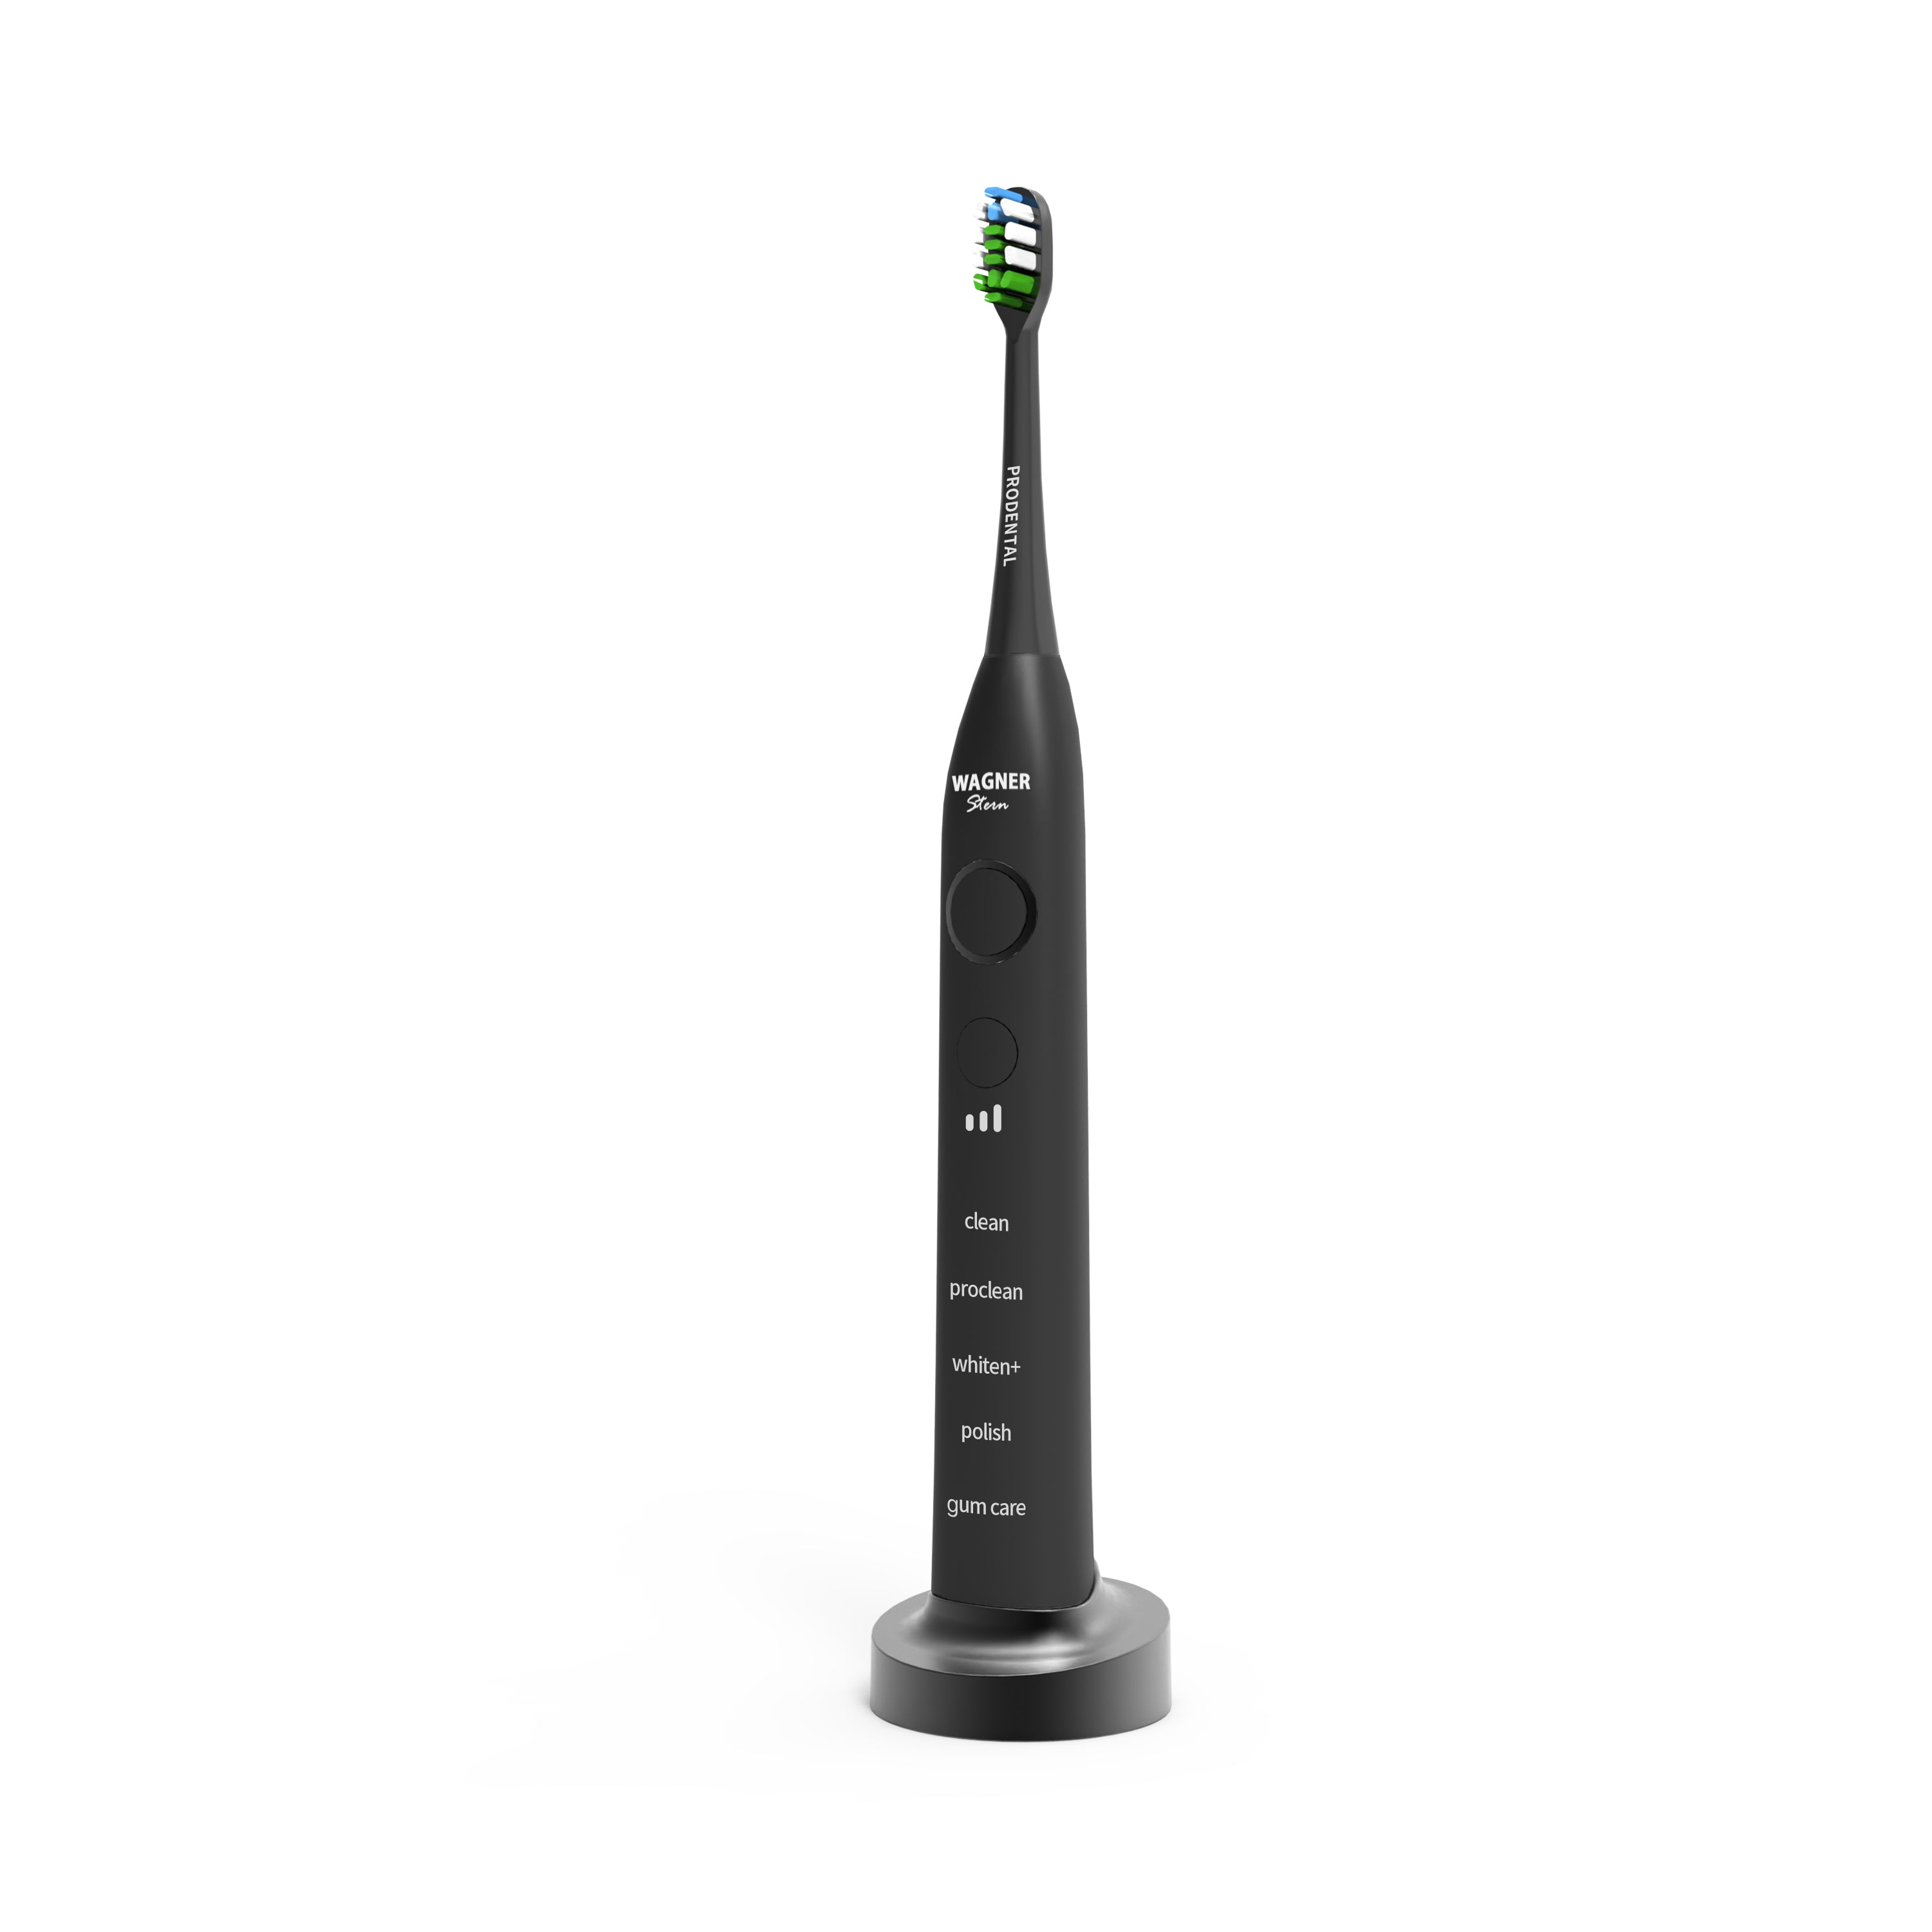 Wagner & Stern ProDental Series Electric Toothbrush 5 Brushing Modes and 3 Intensity Levels, 8 Dupont Bristles, Premium Travel Case.